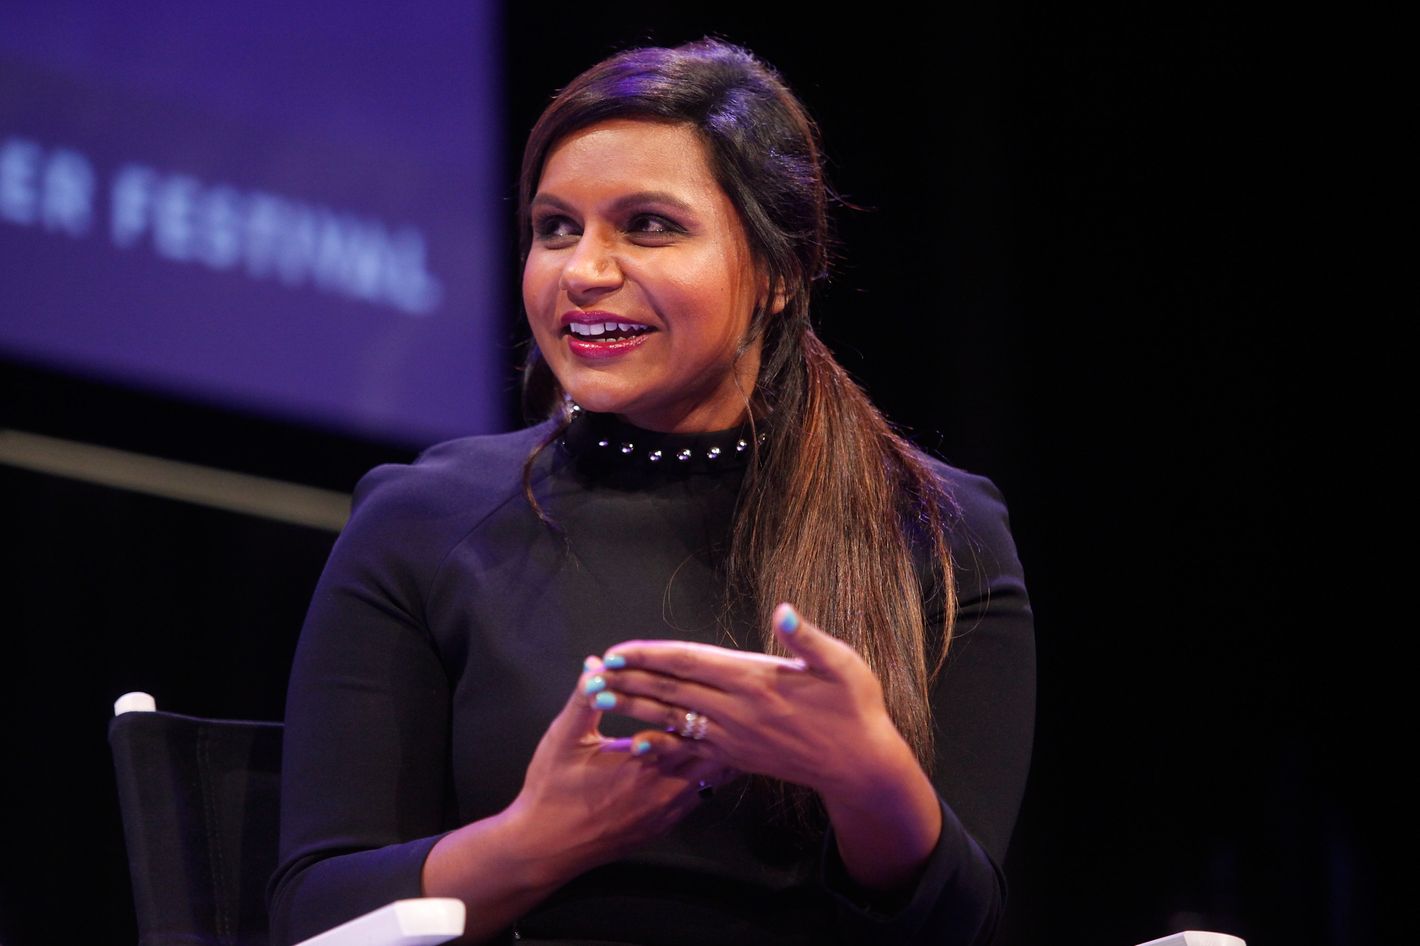 Mindy Kaling Talks About Filming Broadcast TVs First Anal-Sex Scene on The Mindy Project